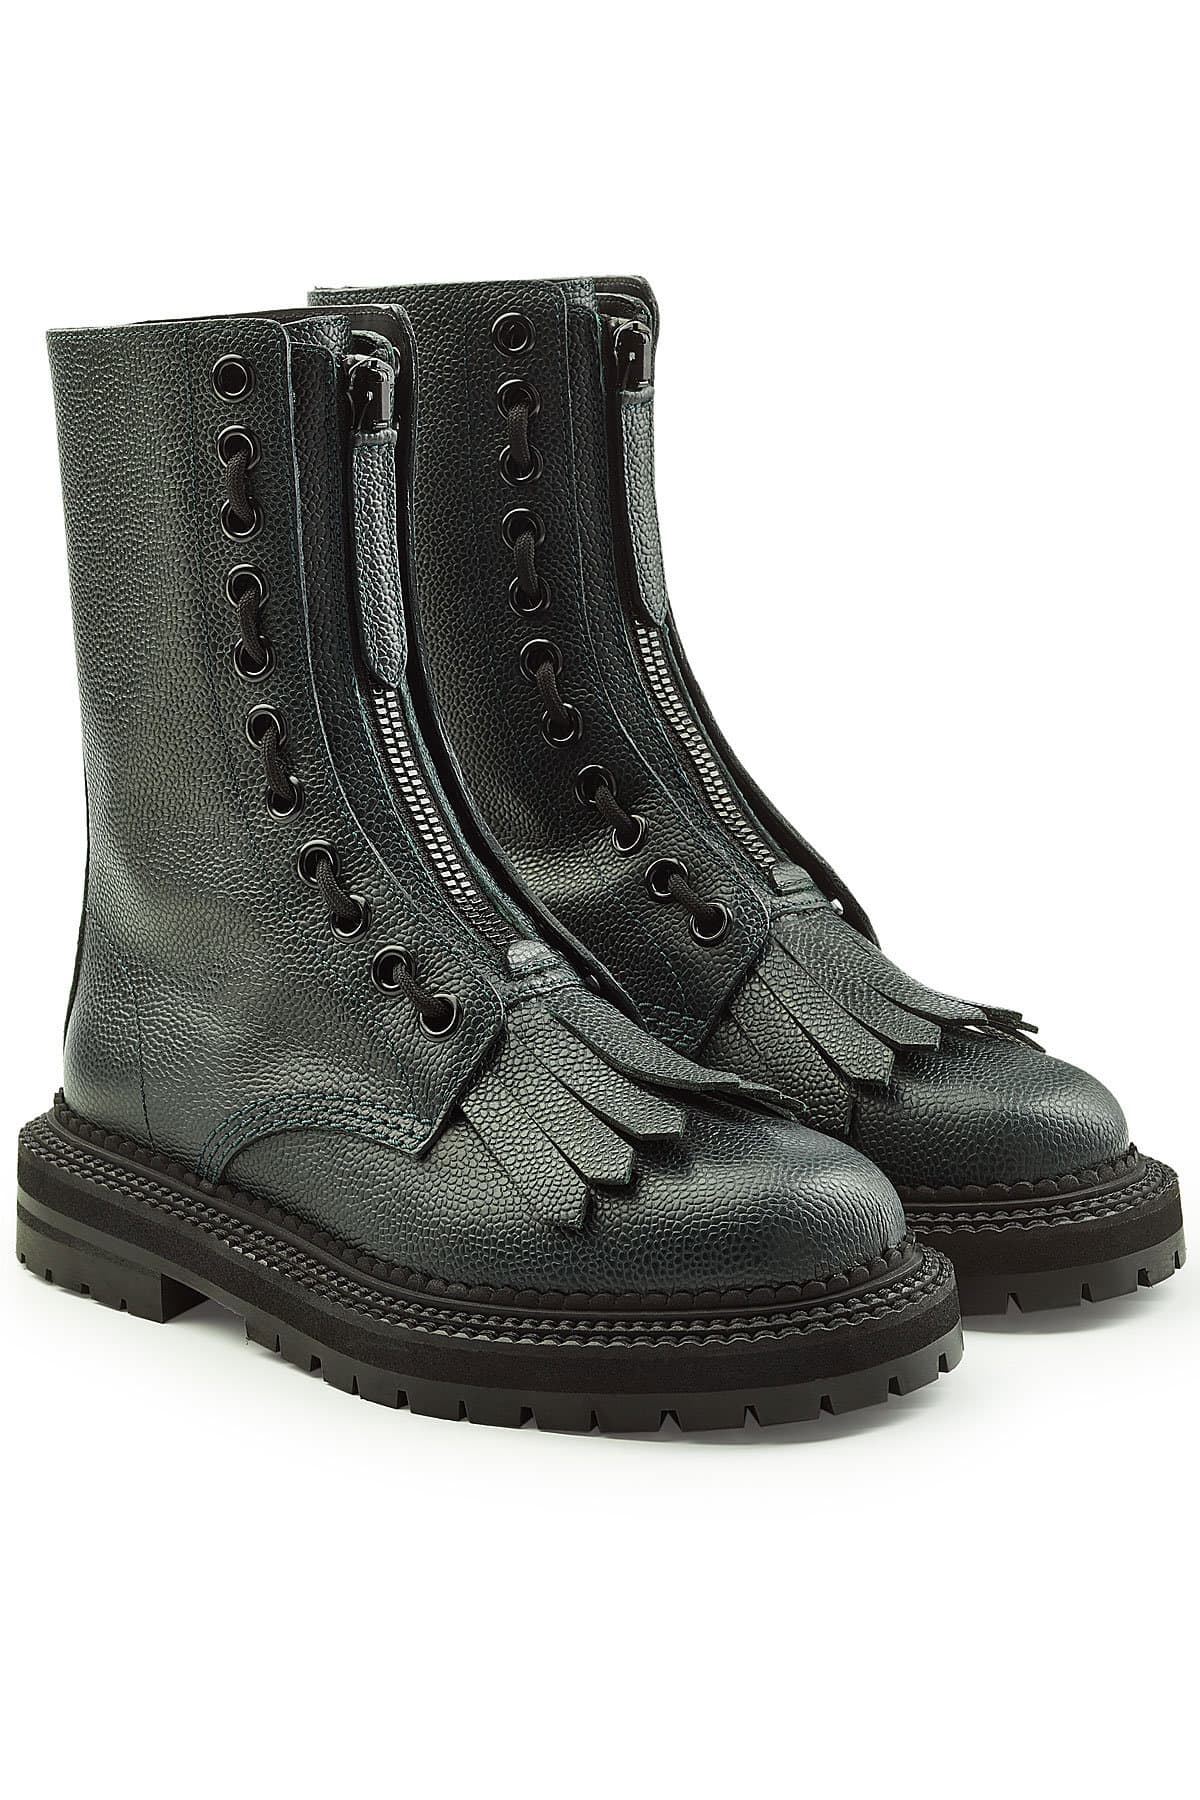 Leather Kiltie Boots by Burberry